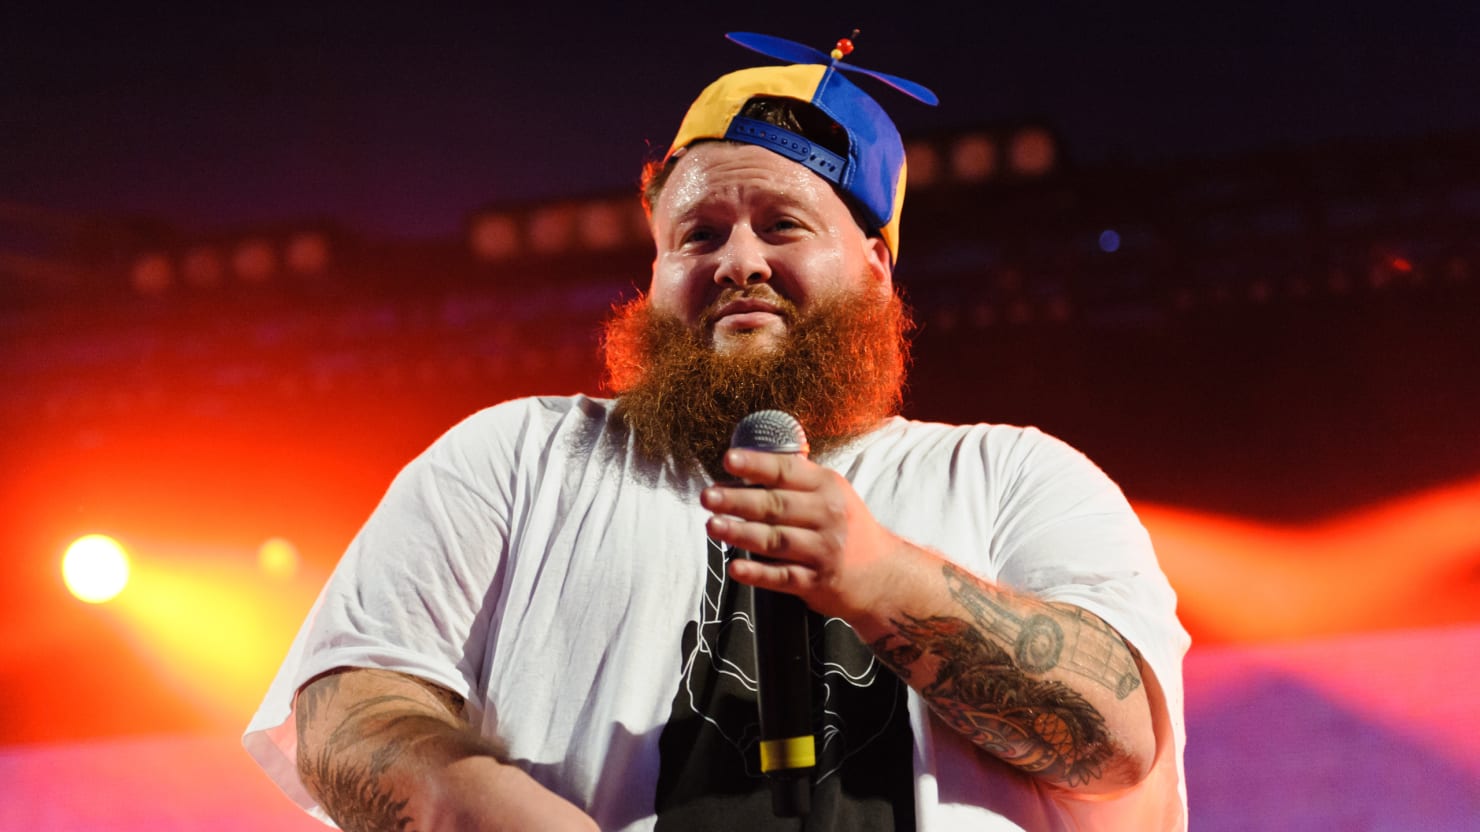 A hefty Queens native and ex-chef, Action Bronson has a style like Ghostfac...